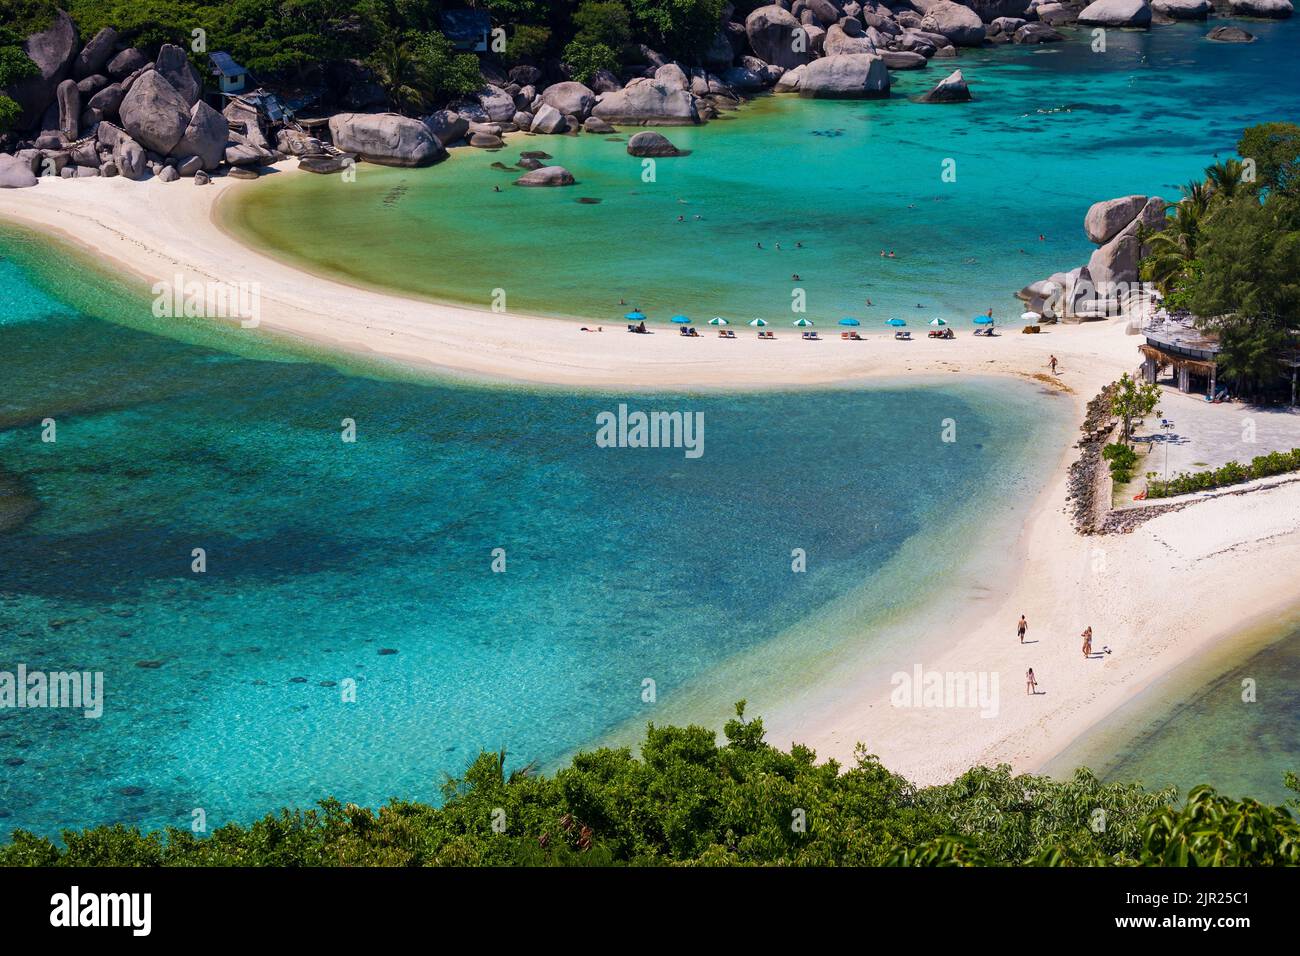 Aerial shot of the idyllic tropical island of Koh Nang Yuan from its famous viewpoint, Thailand Stock Photo